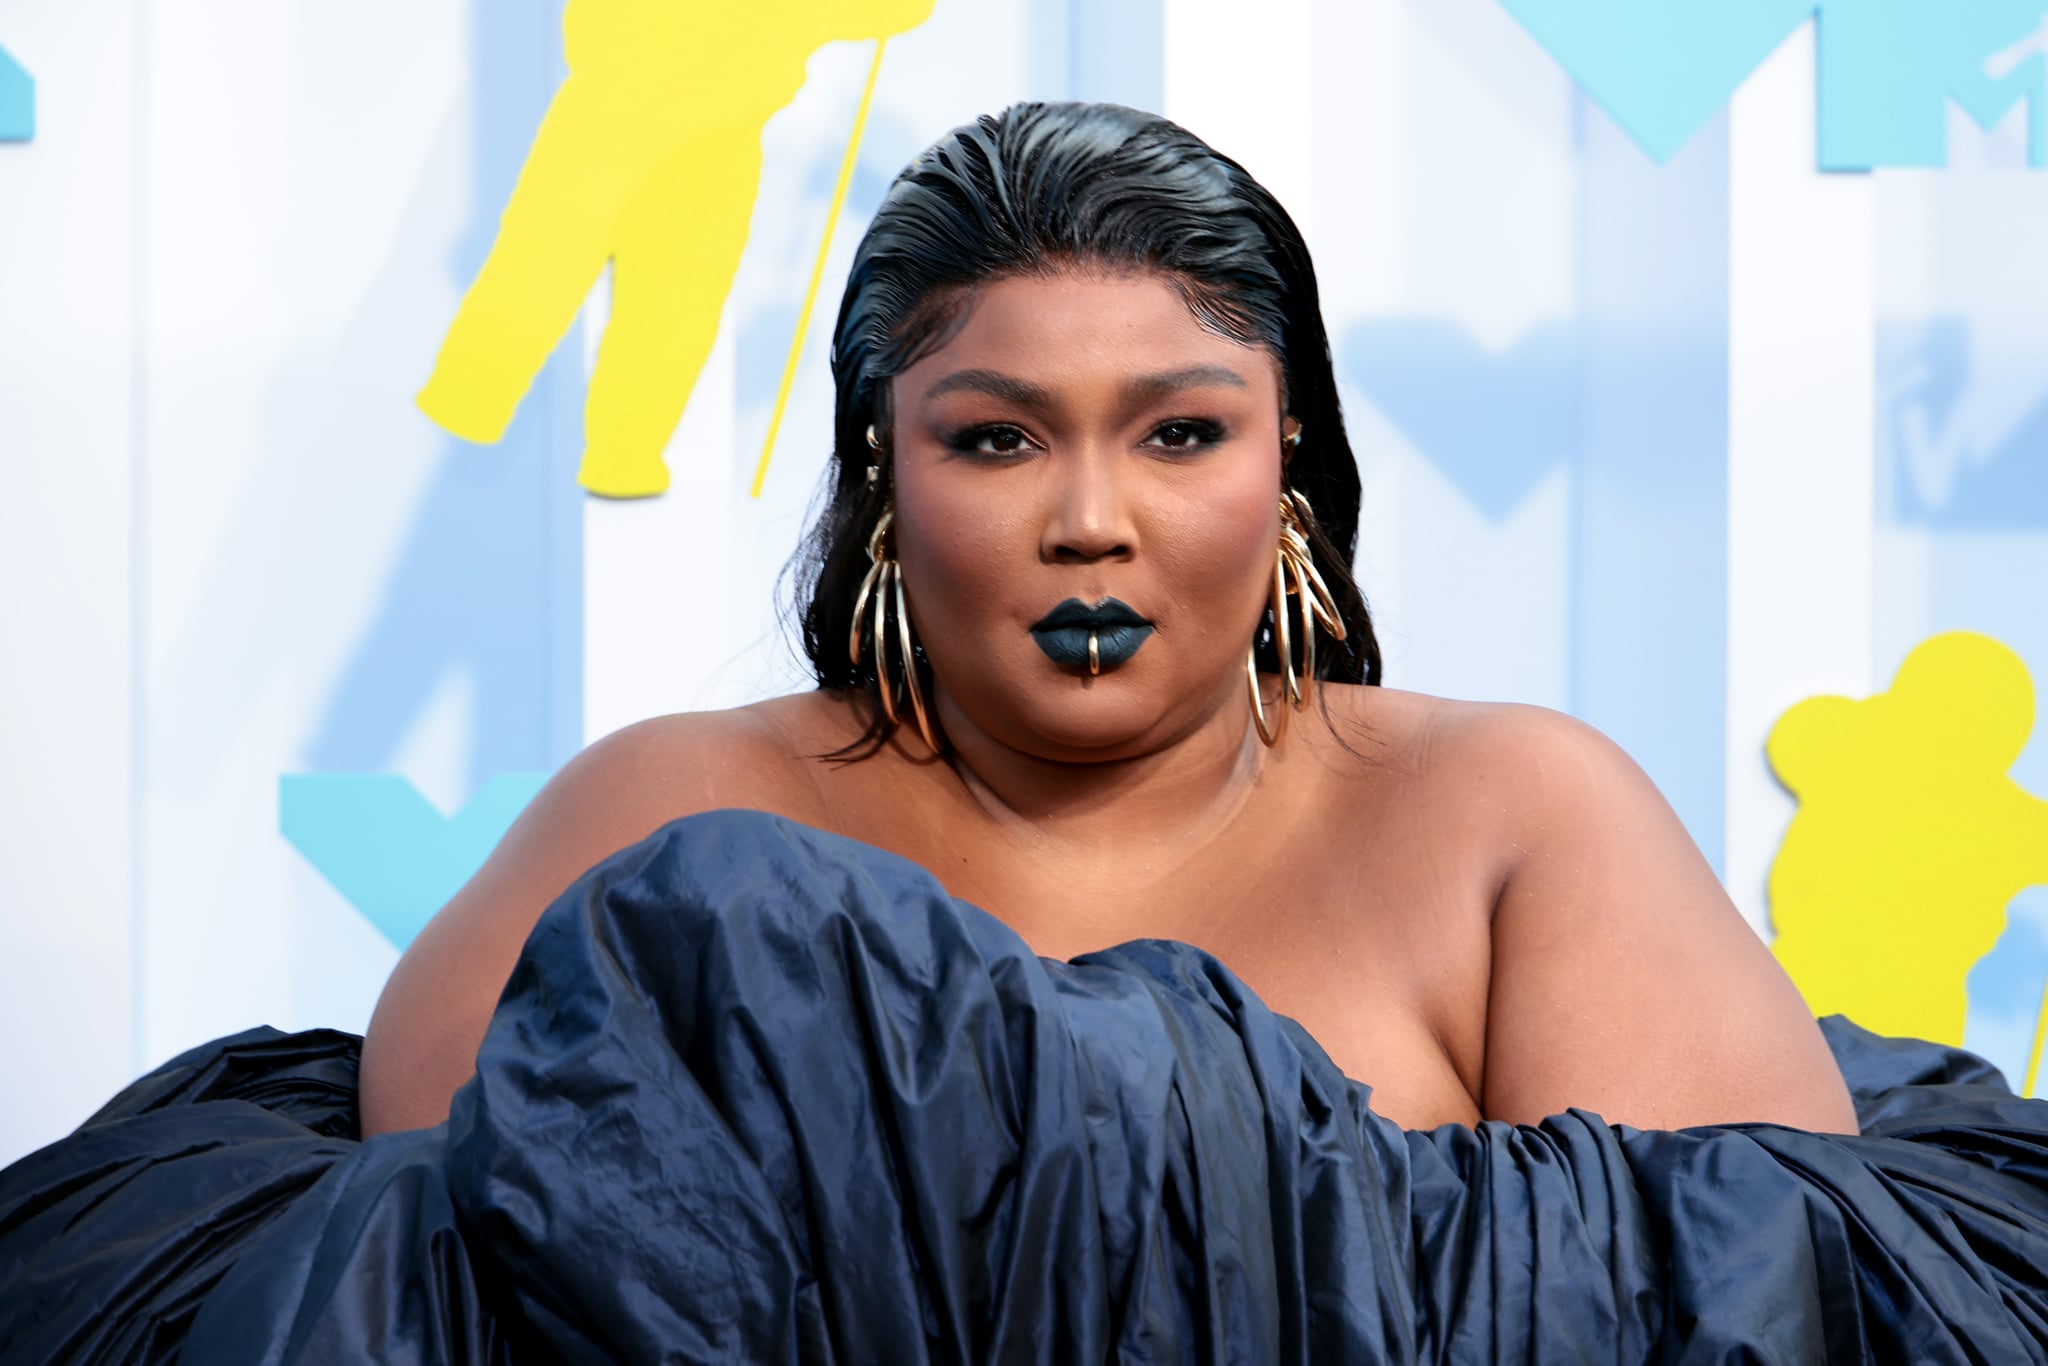 NEWARK, NEW JERSEY - AUGUST 28: Lizzo attends the 2022 MTV VMAs at Prudential Centre on August 28, 2022 in Newark, New Jersey. (Photo by Dimitrios Kambouris/Getty Images for MTV/Paramount Global)